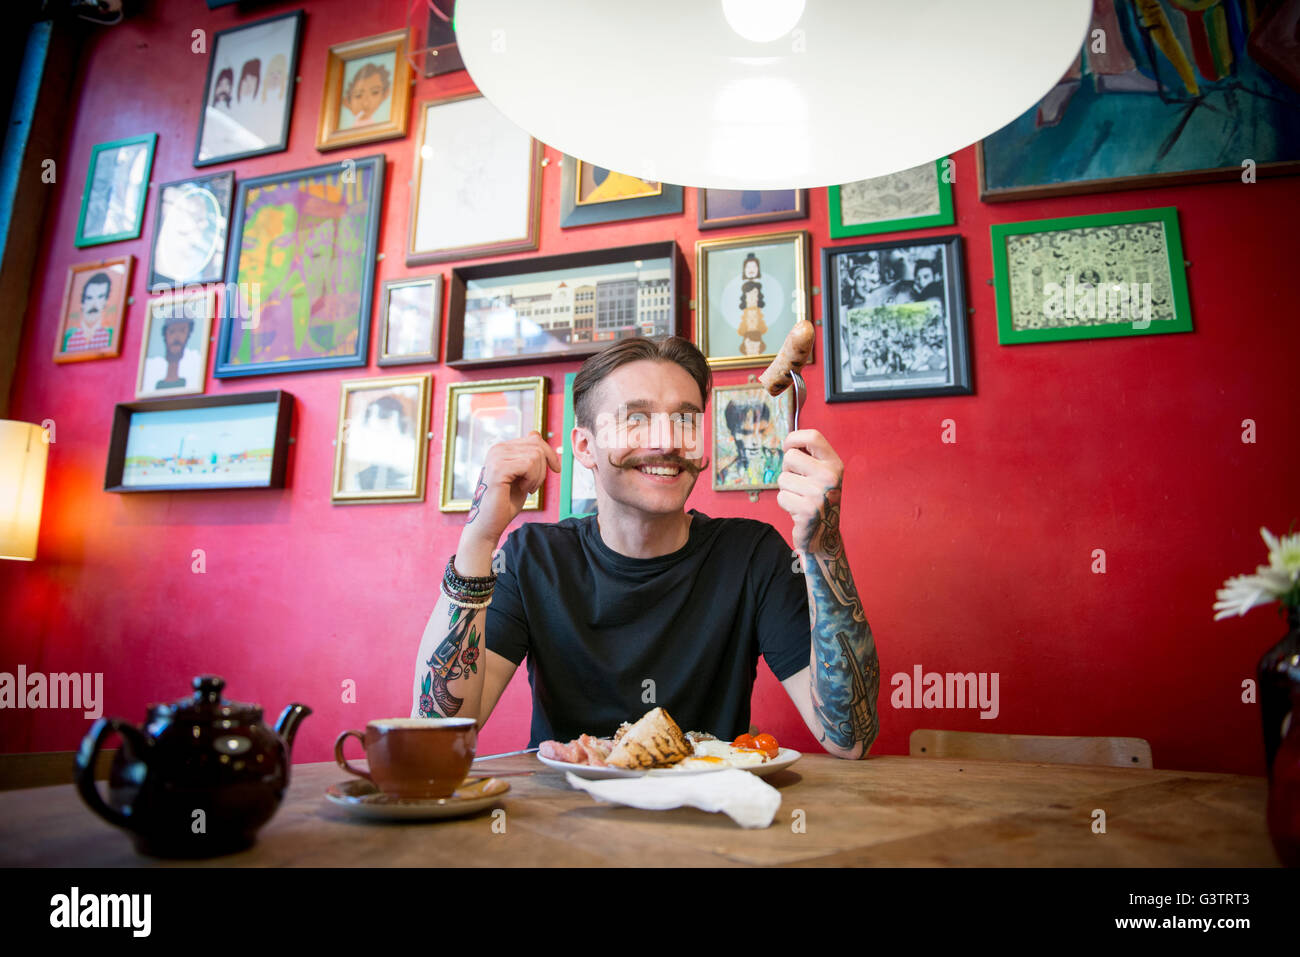 A young man eating at a table in a coffee shop in Manchester. Stock Photo